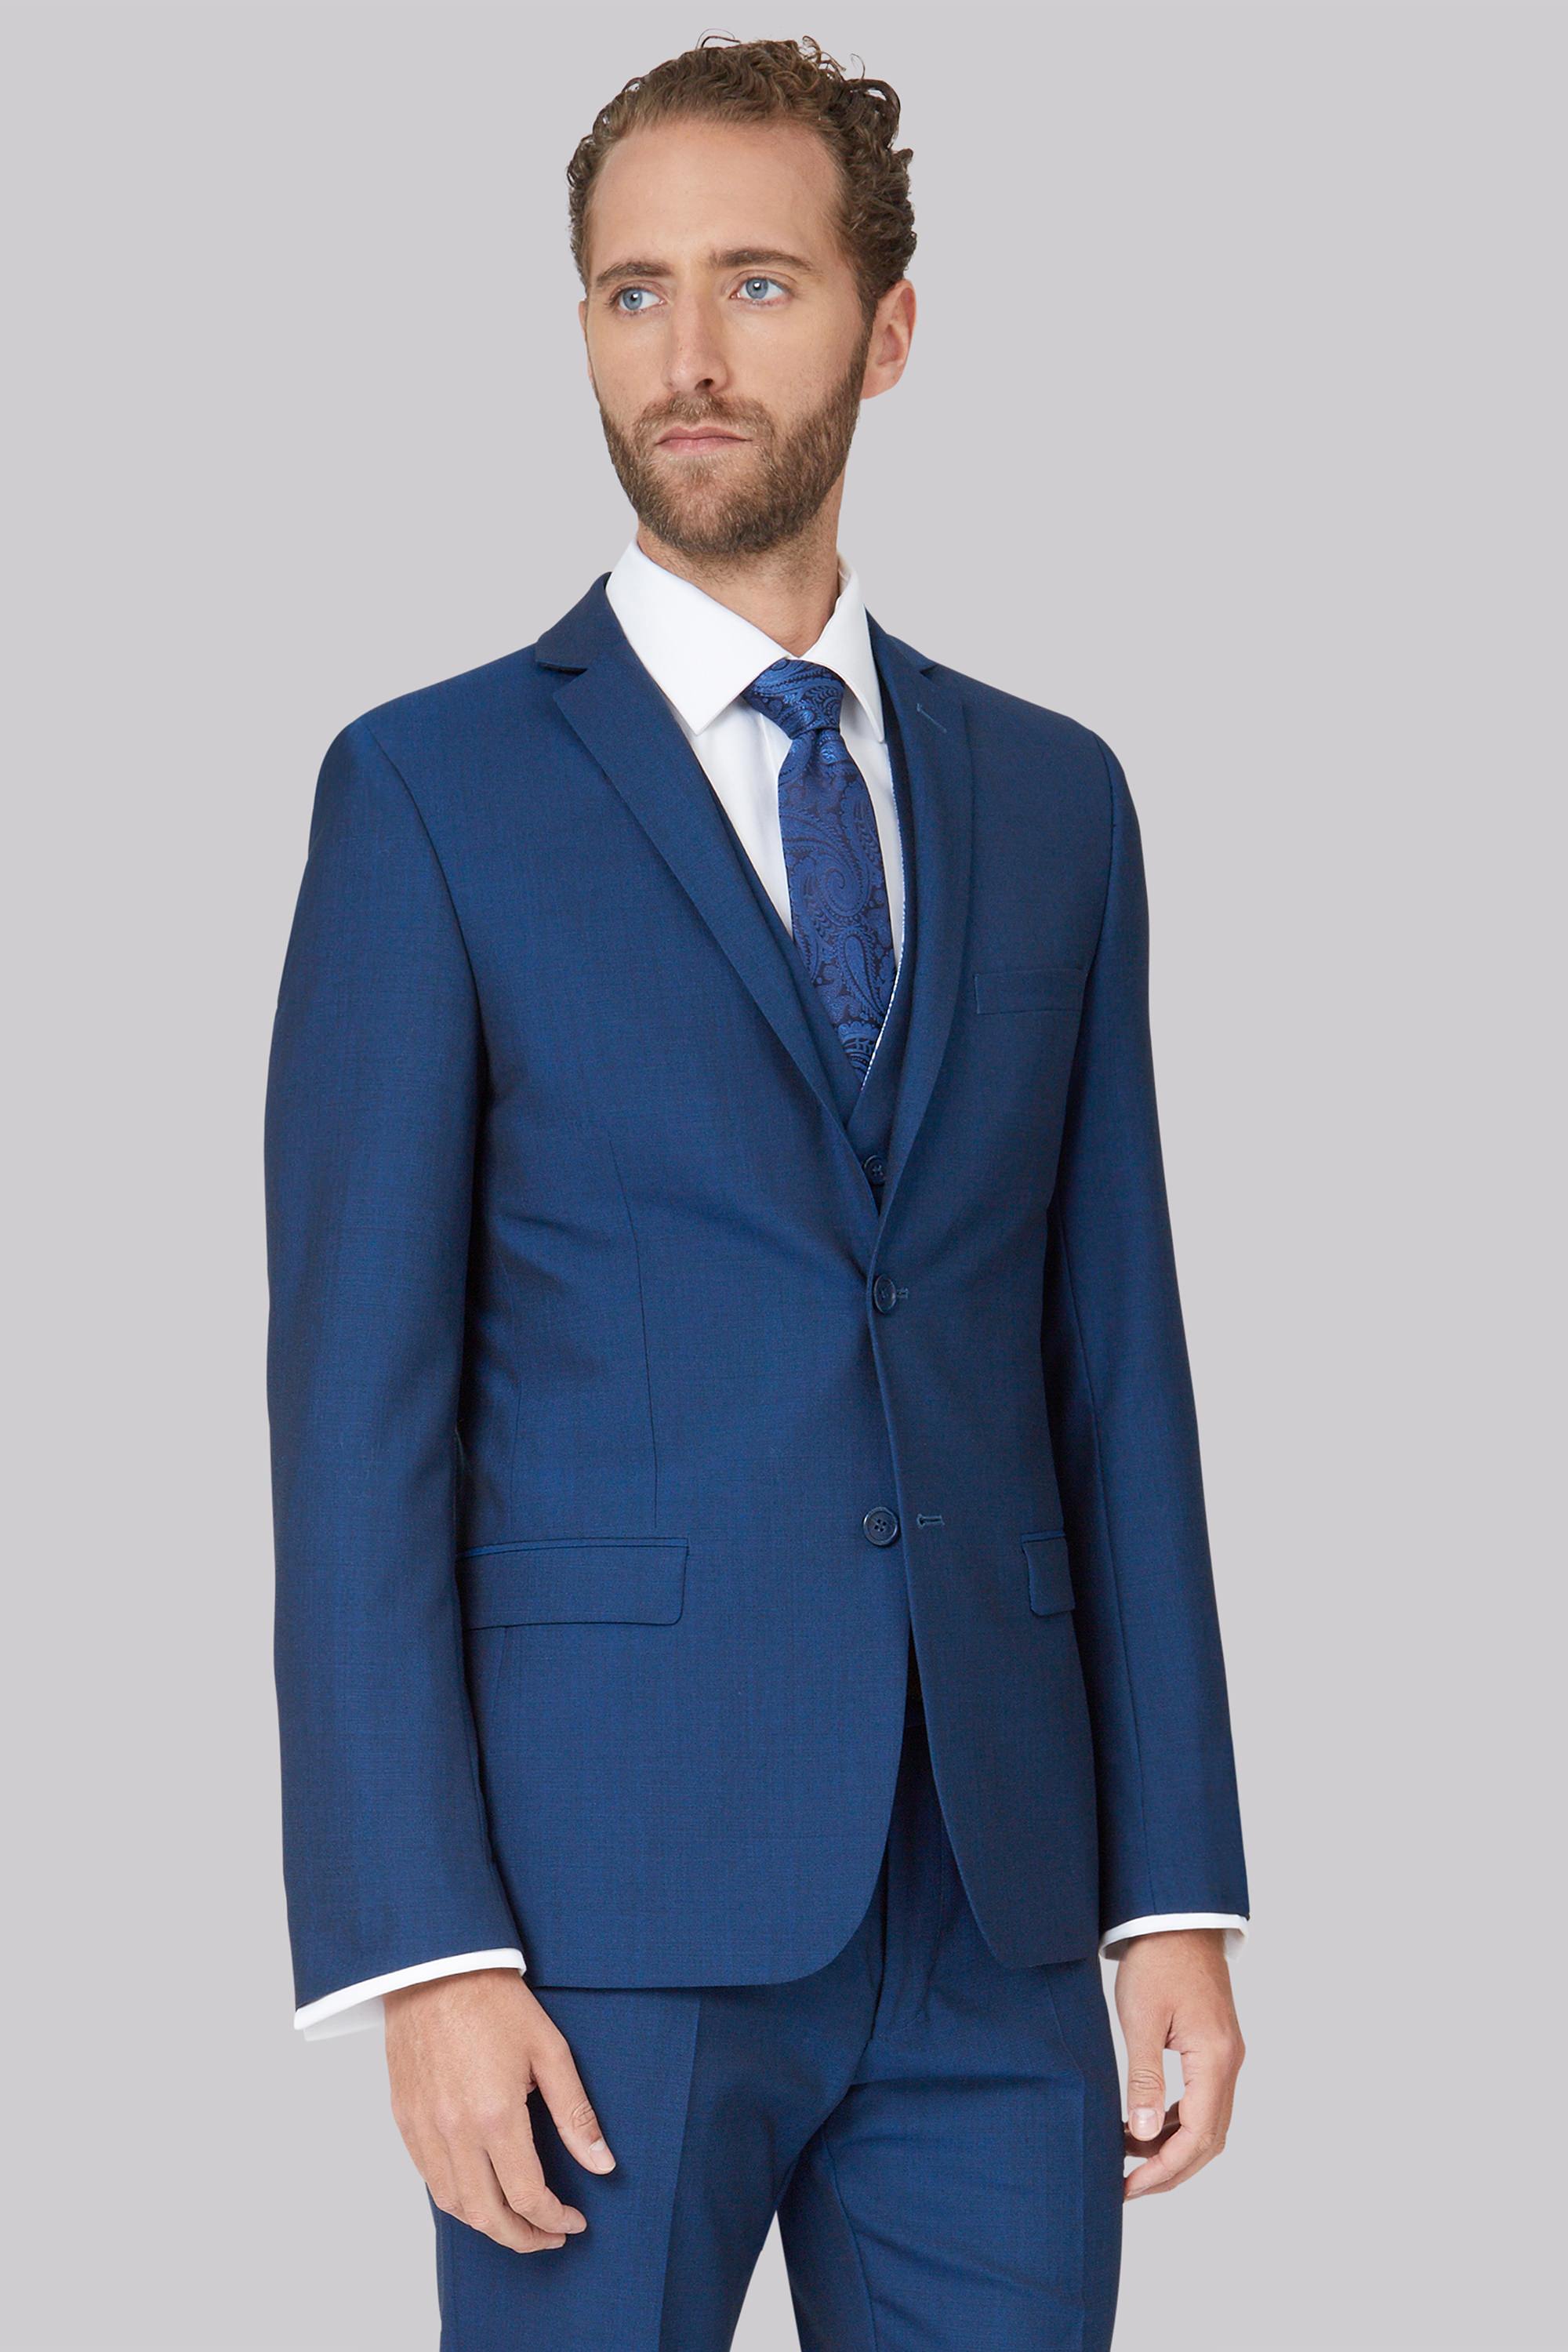 Ted Baker Tailored Fit Teal Mohair Look Jacket | Buy Online at Moss